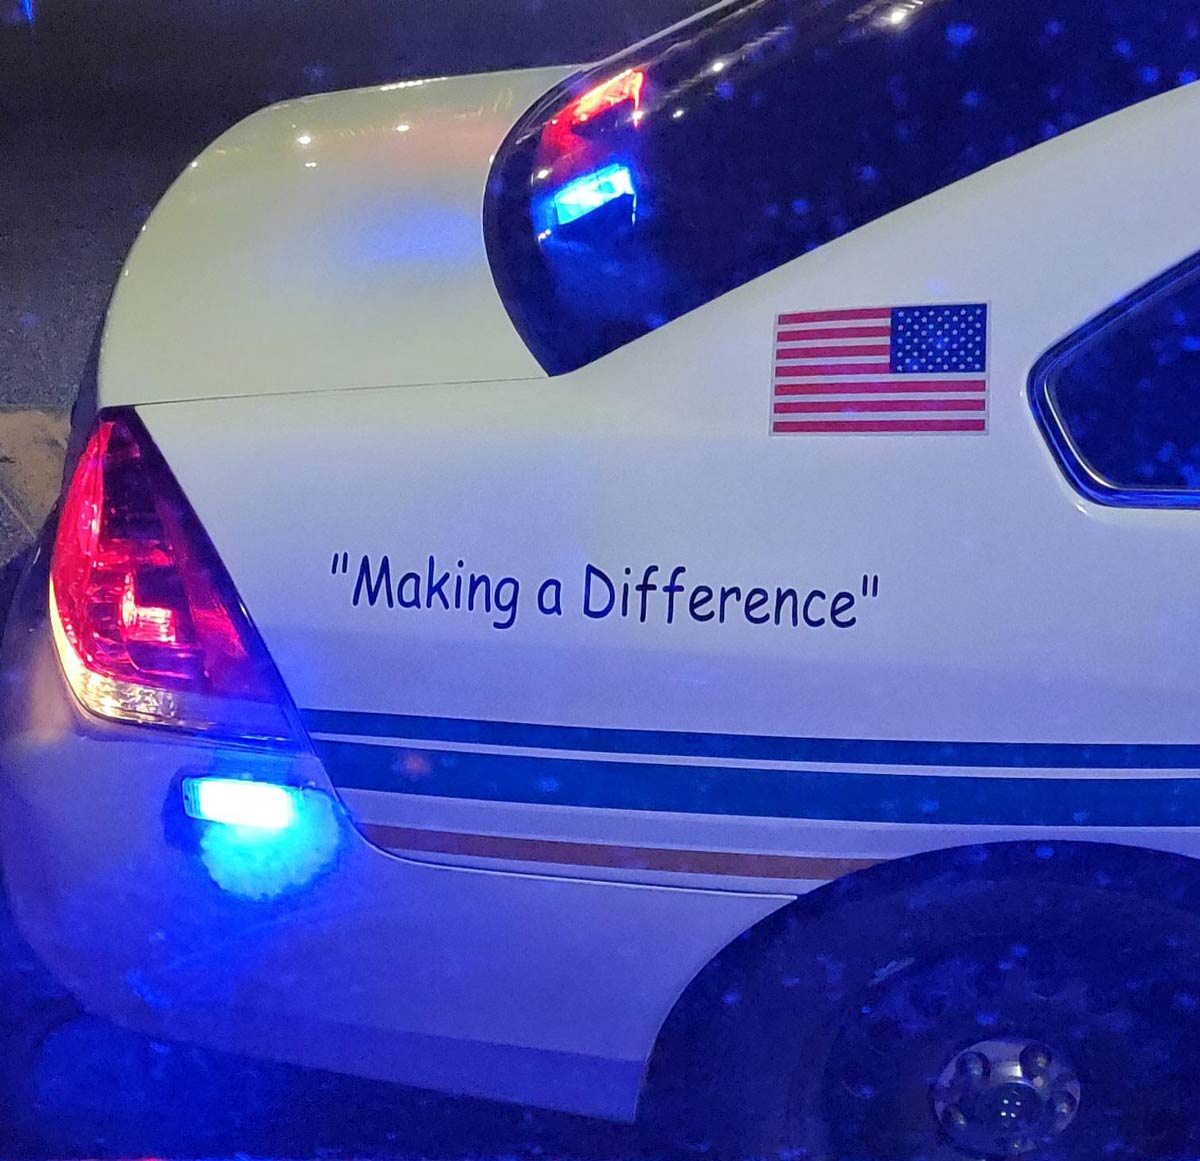 Comic Sans used for a police slogan in Orlando, Florida